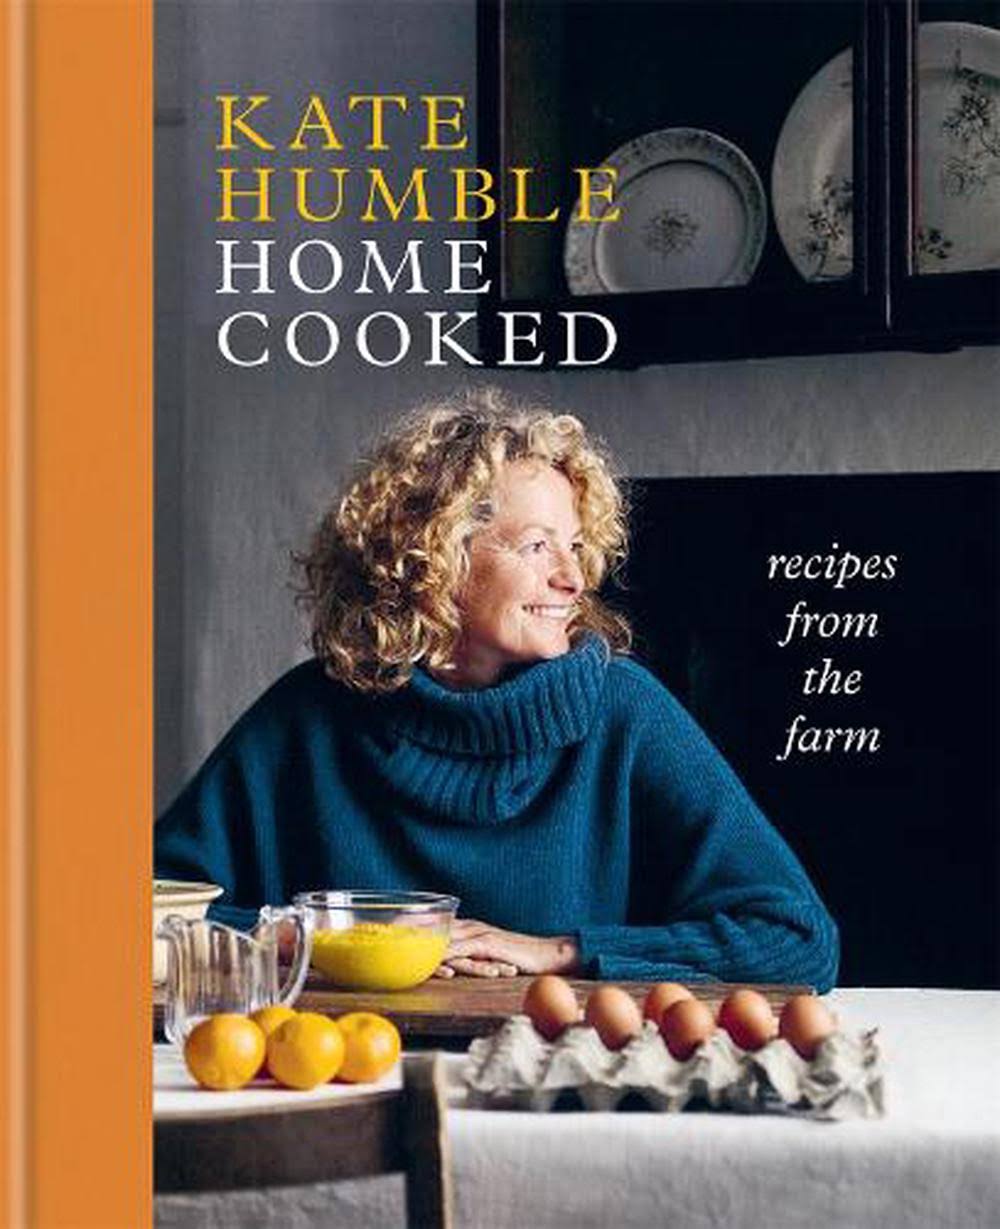 Home Cooked by Kate Humble